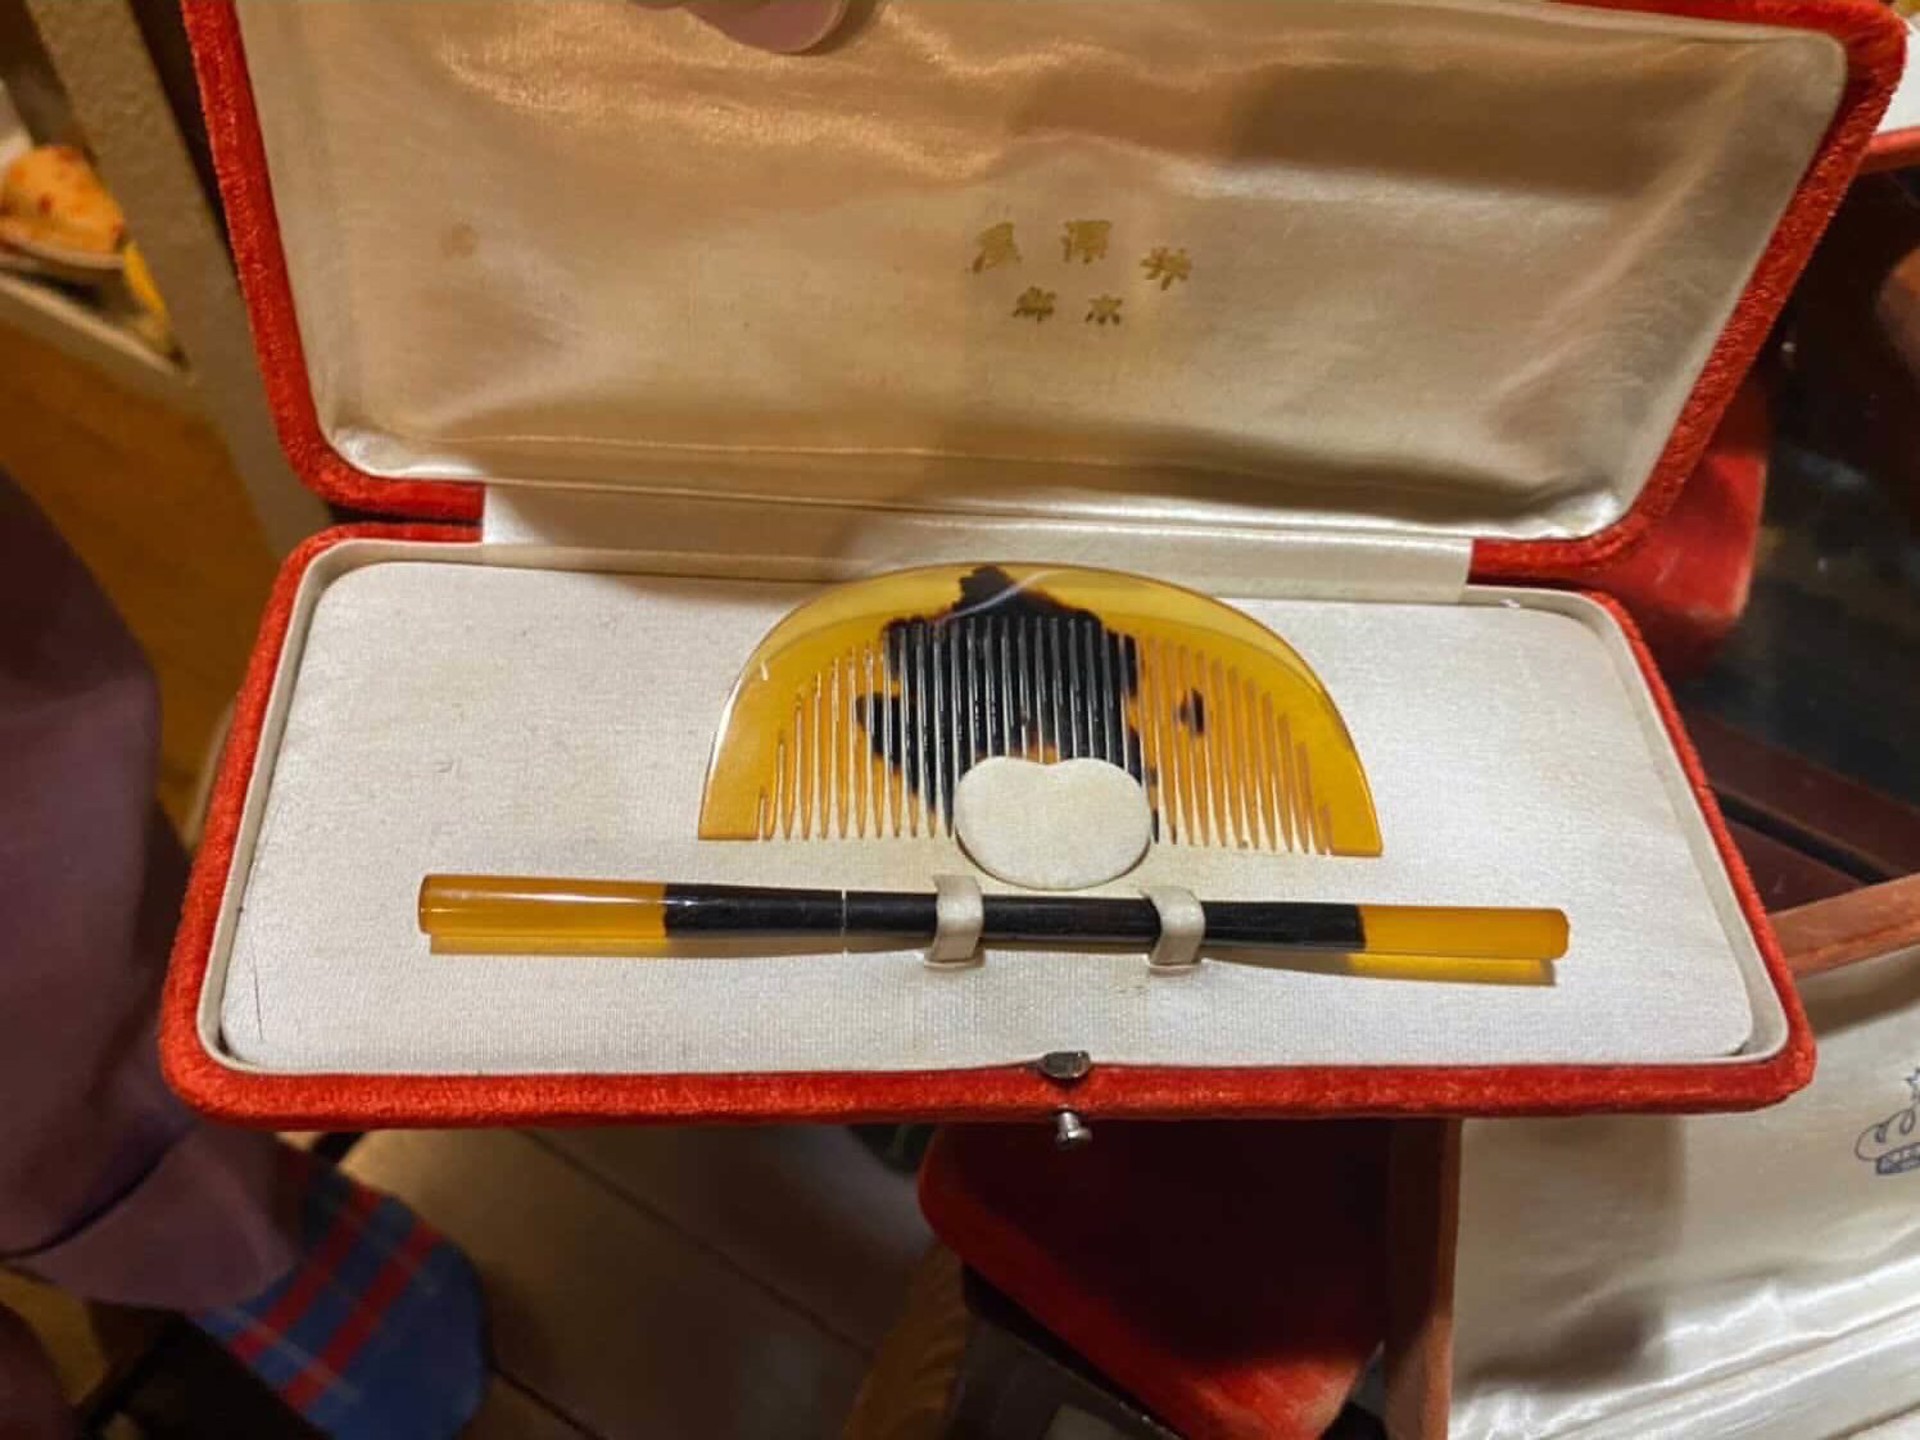 Vintage set of Comb and hairstick (the hairstick is called "kogai" in Japanese) by Kimono Accessories